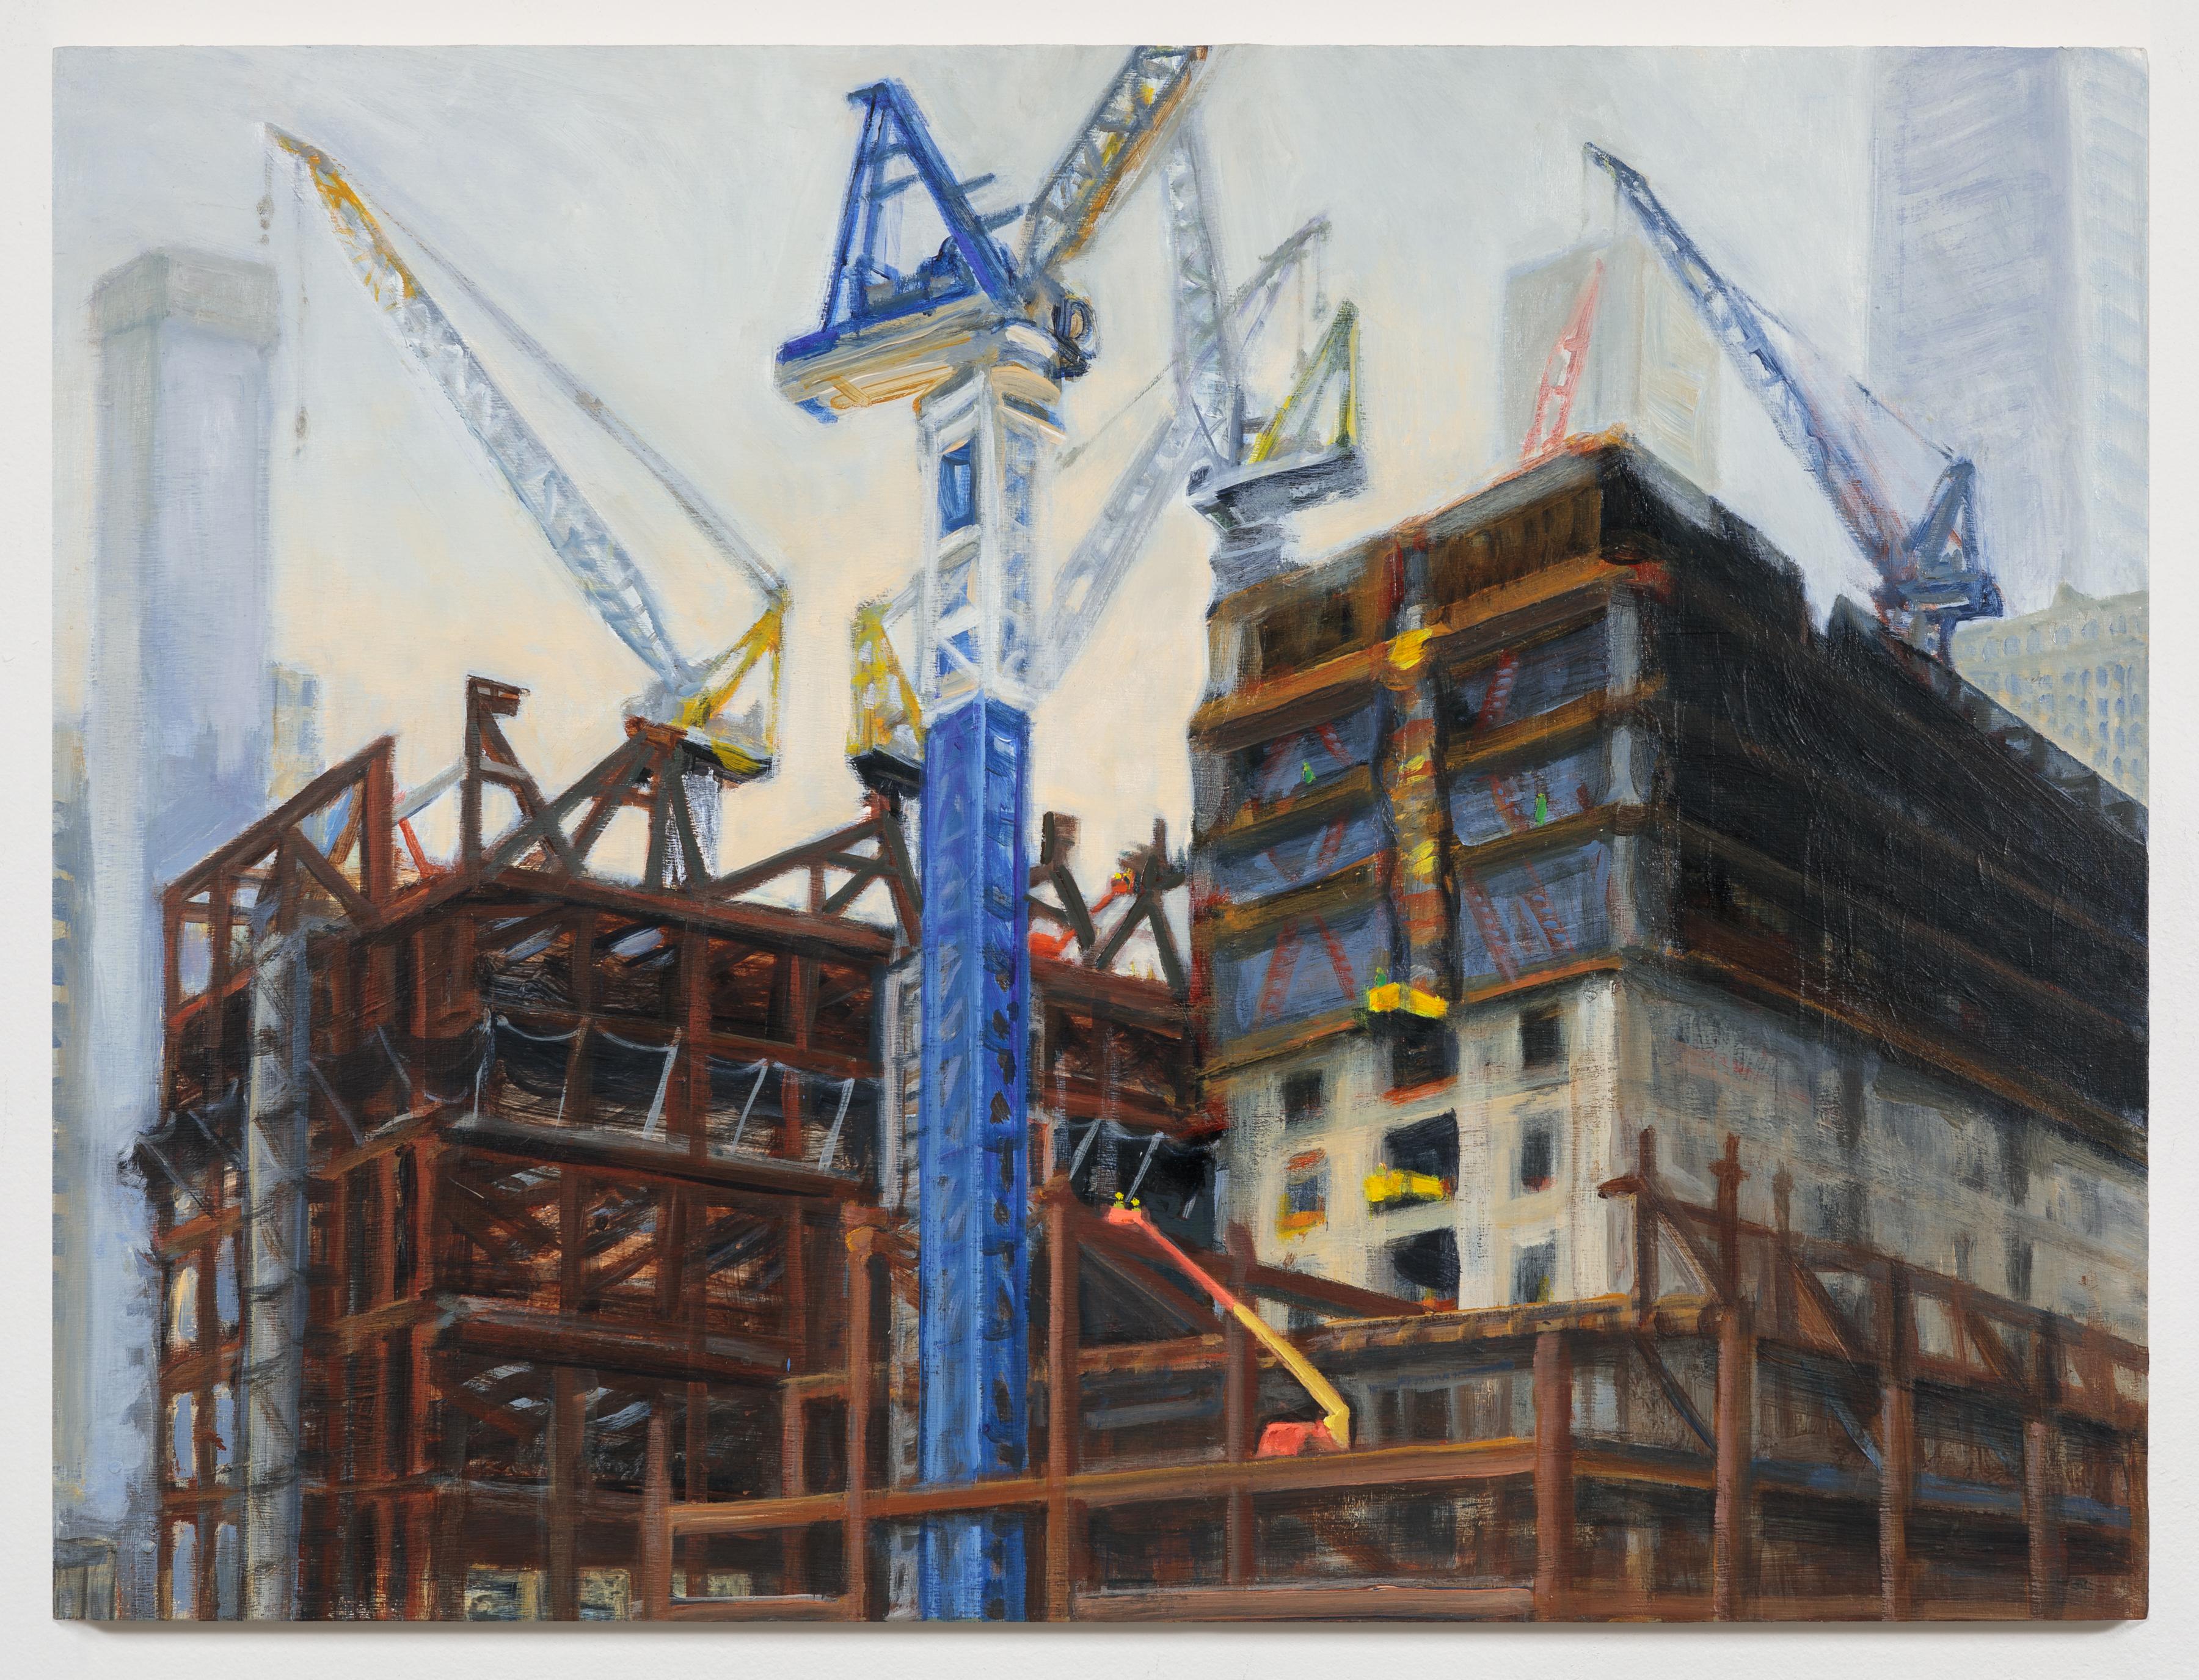 Gwyneth Leech Landscape Painting - Blue Crane and Steel Rising, Hudson Yards, Impressionist cityscape painting